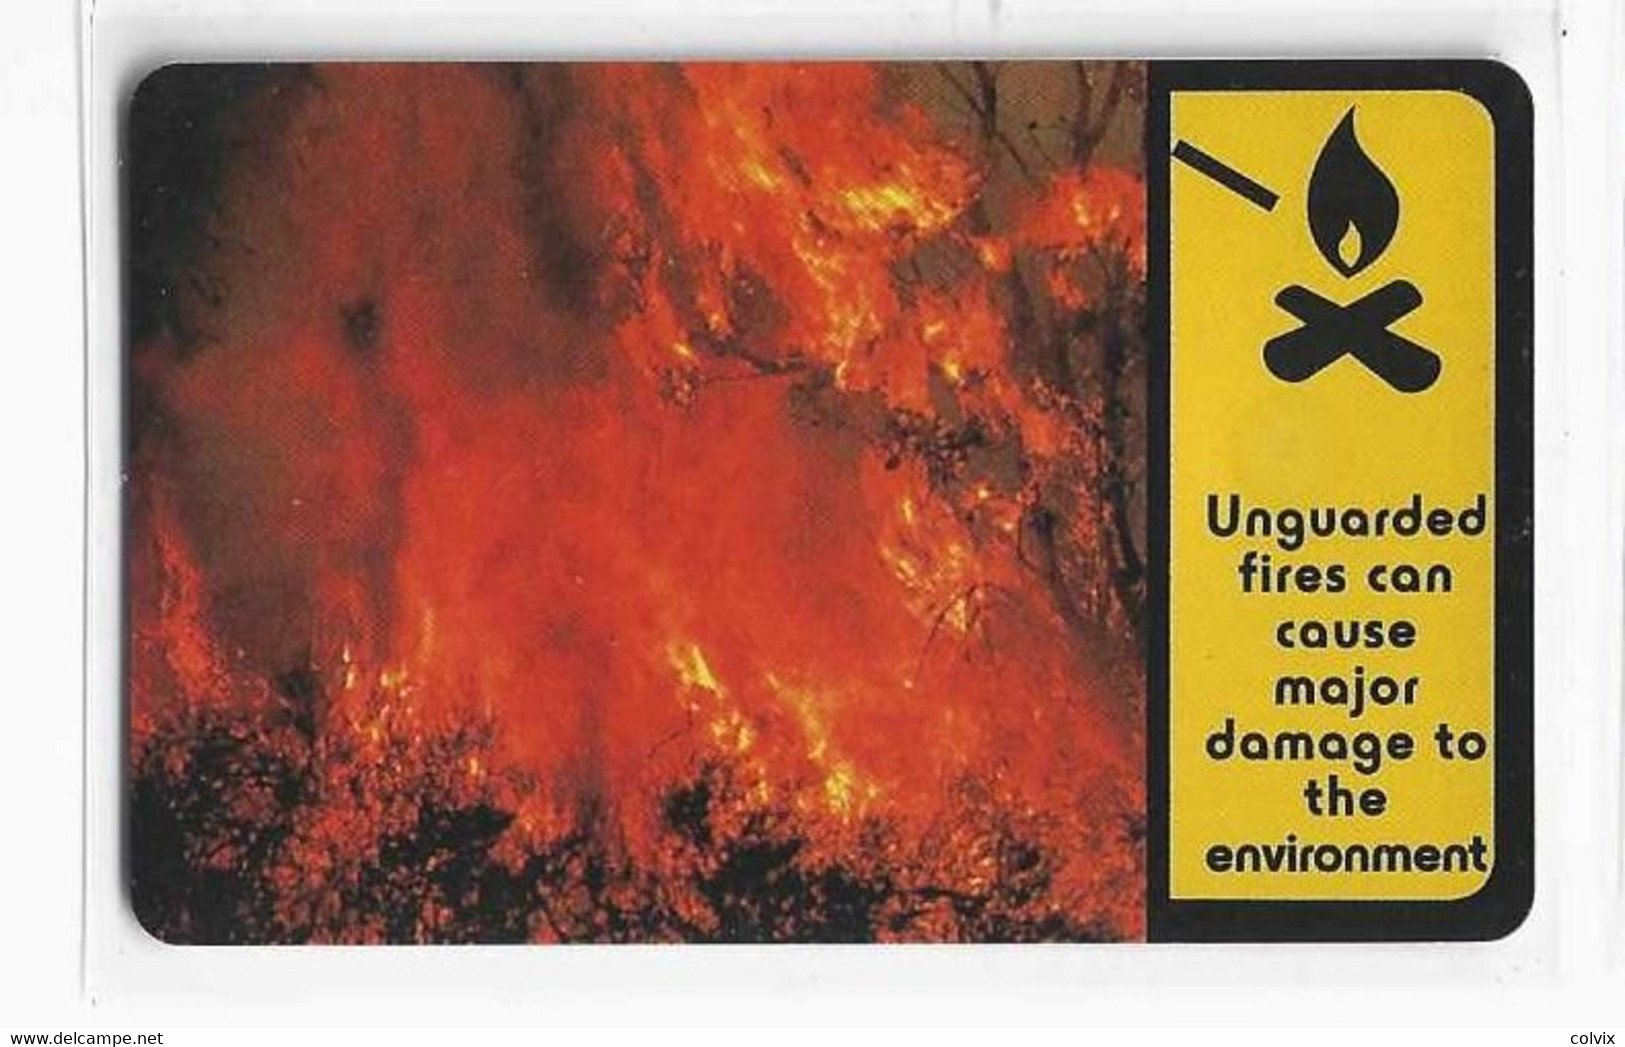 NAMIBIE REF MV CARDS NMB-176 N$10 THEME ENVIRONNEMENT CLIMAT  ECOLOGIE AIR POLLUTION SO3 Date 2000 MINT NEUF - Namibia